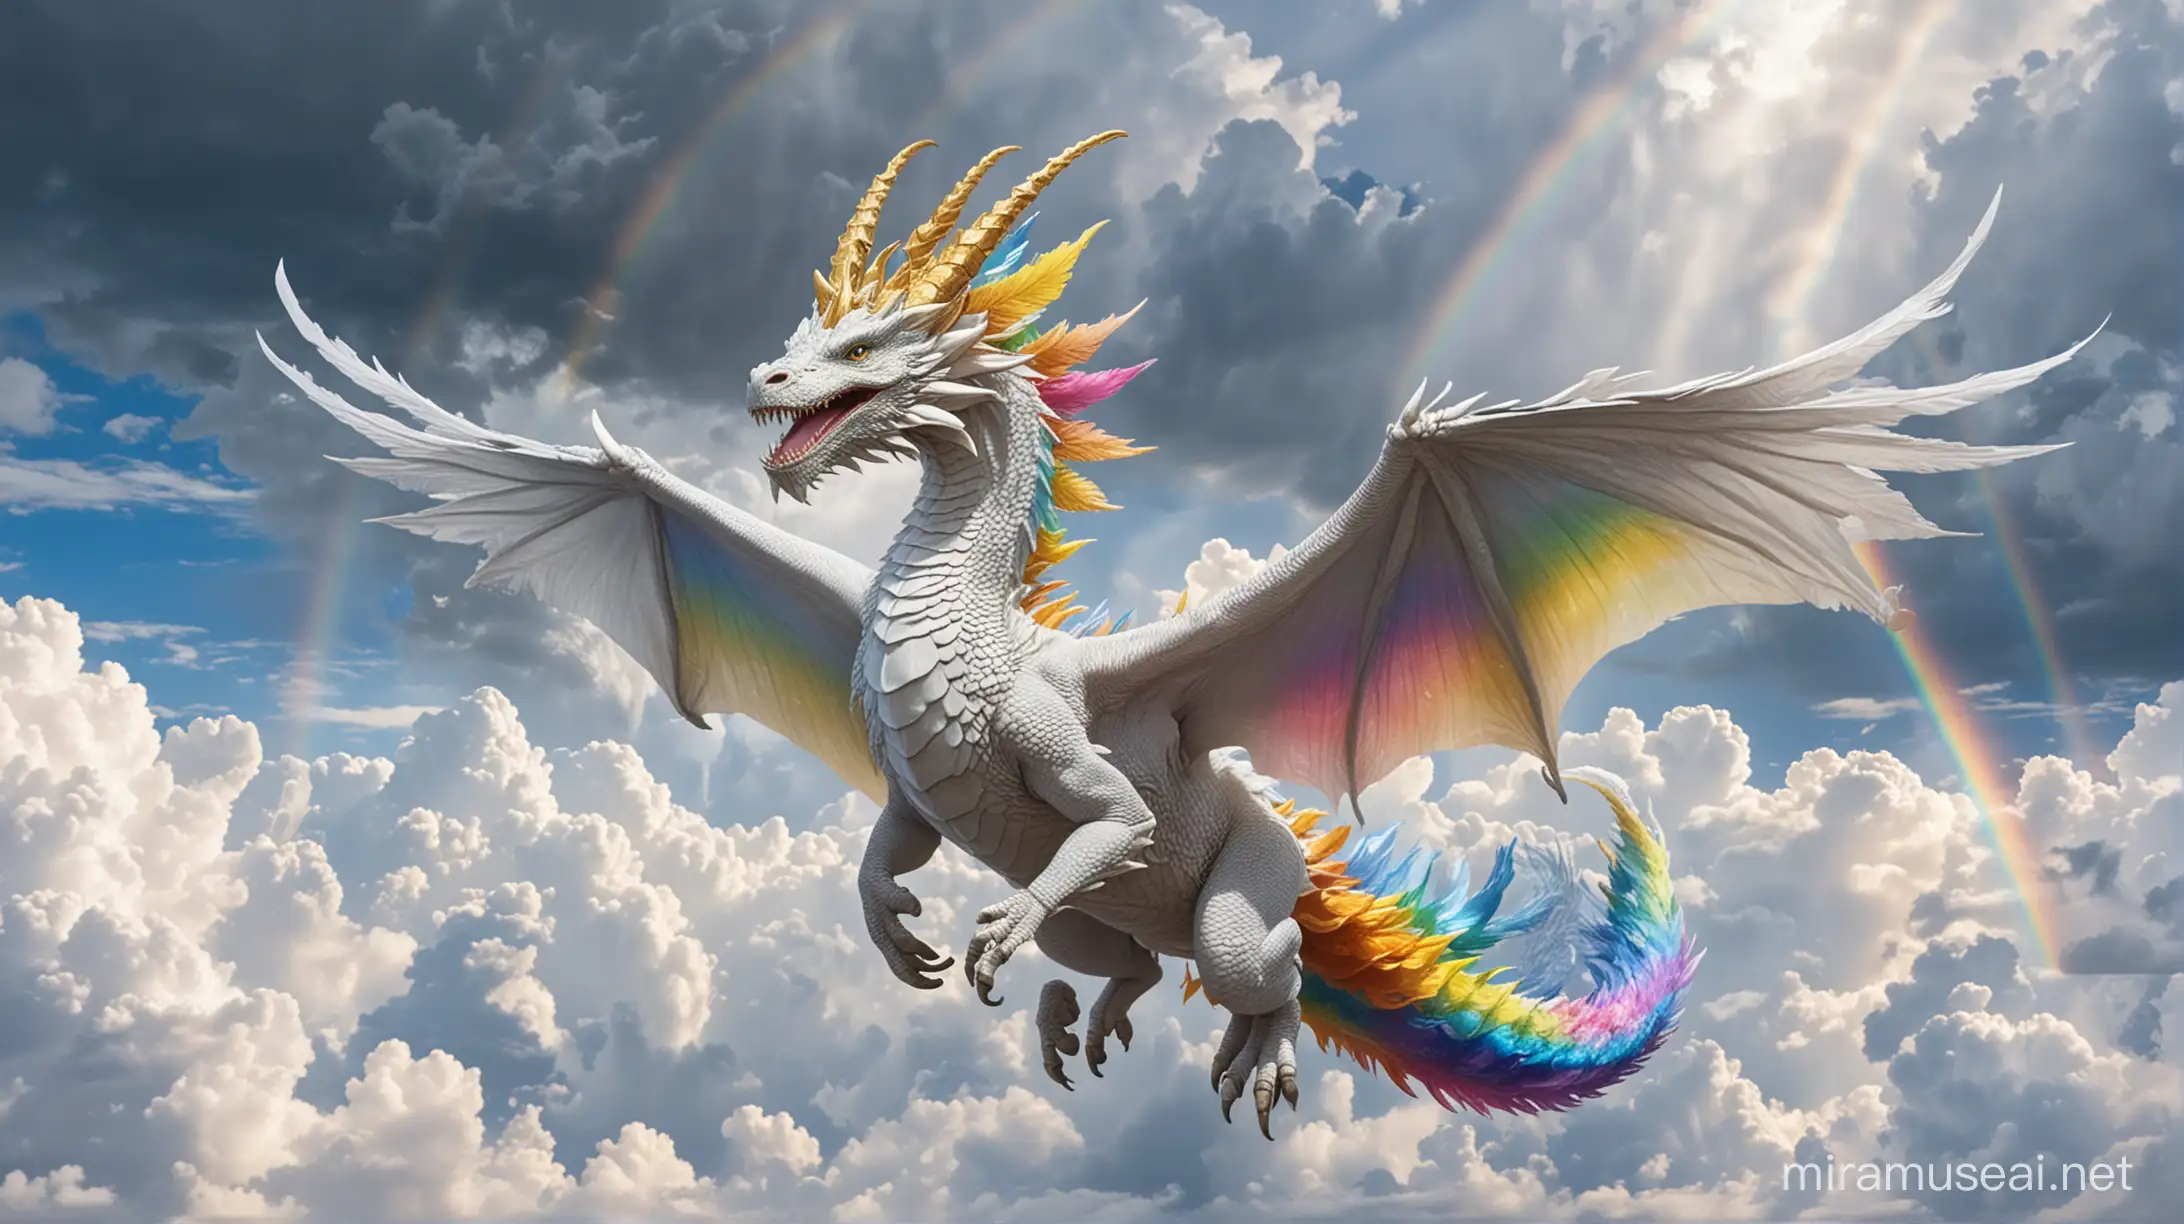 photo, white-winged dragon, white wings, golden crown on its head, rainbow-colored horns on its head, flying through the clouds